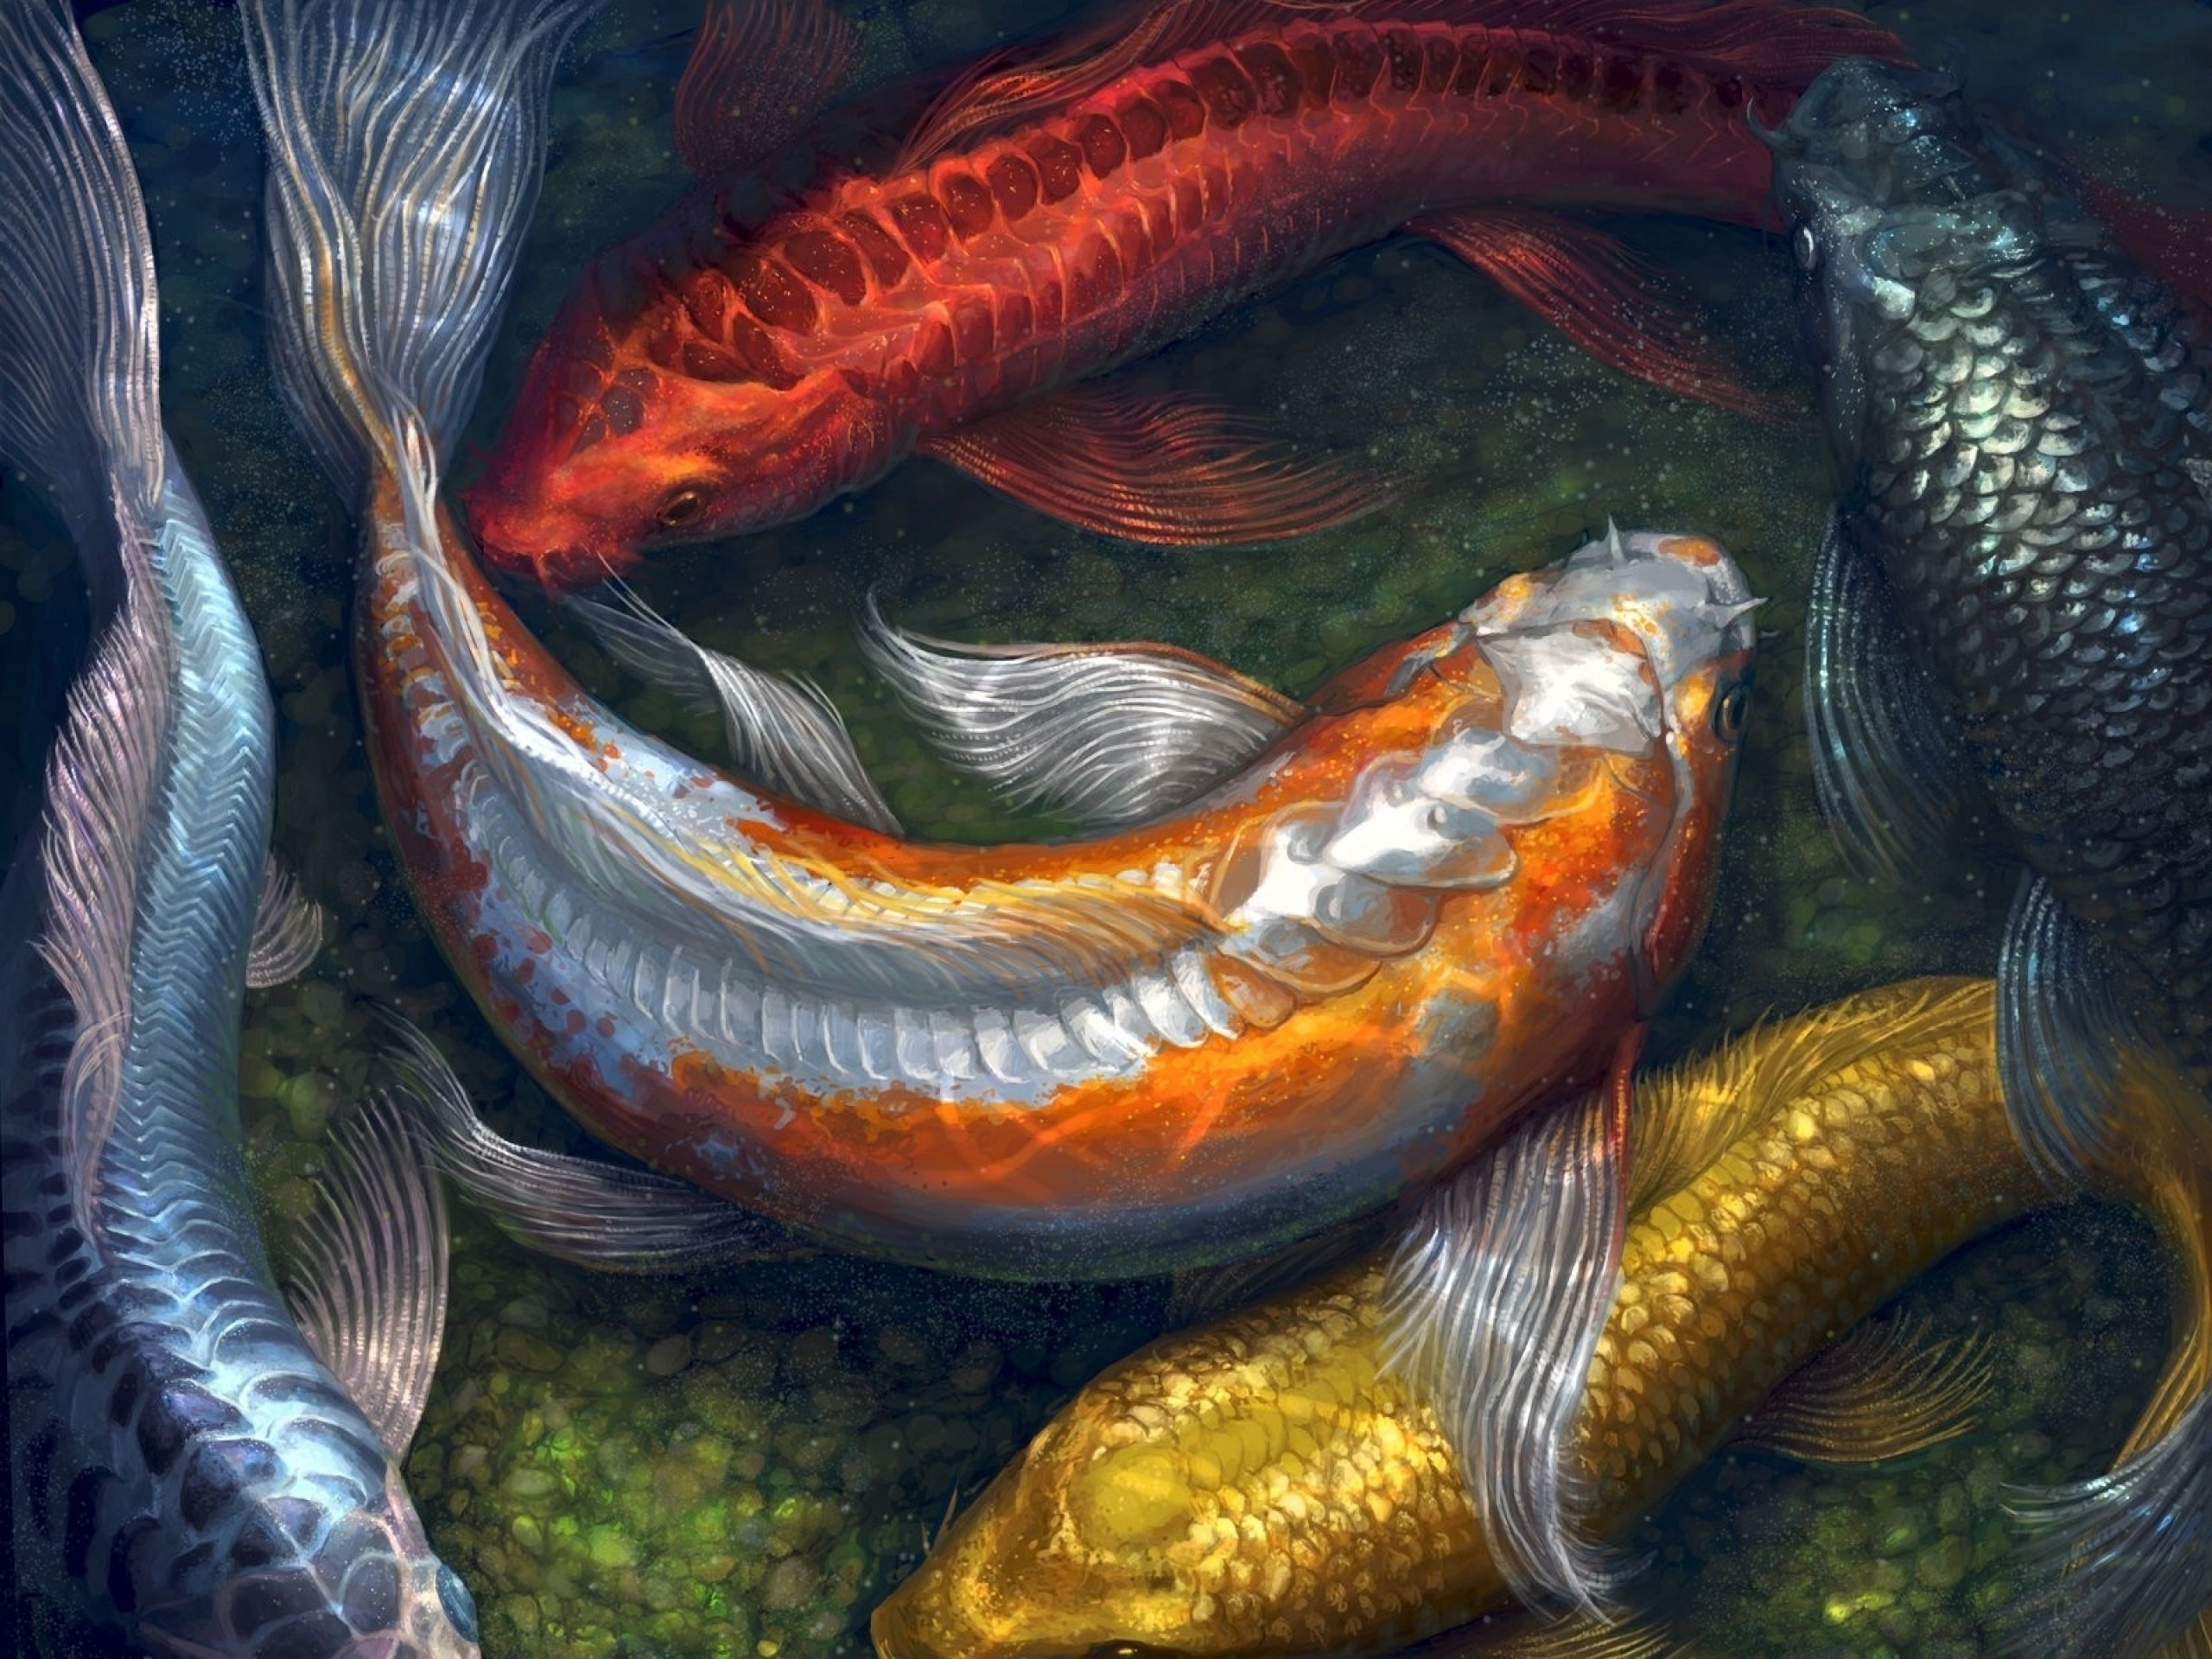 10 Most Popular Koi Fish Wallpaper Hd FULL HD 1080p For PC Background 2021